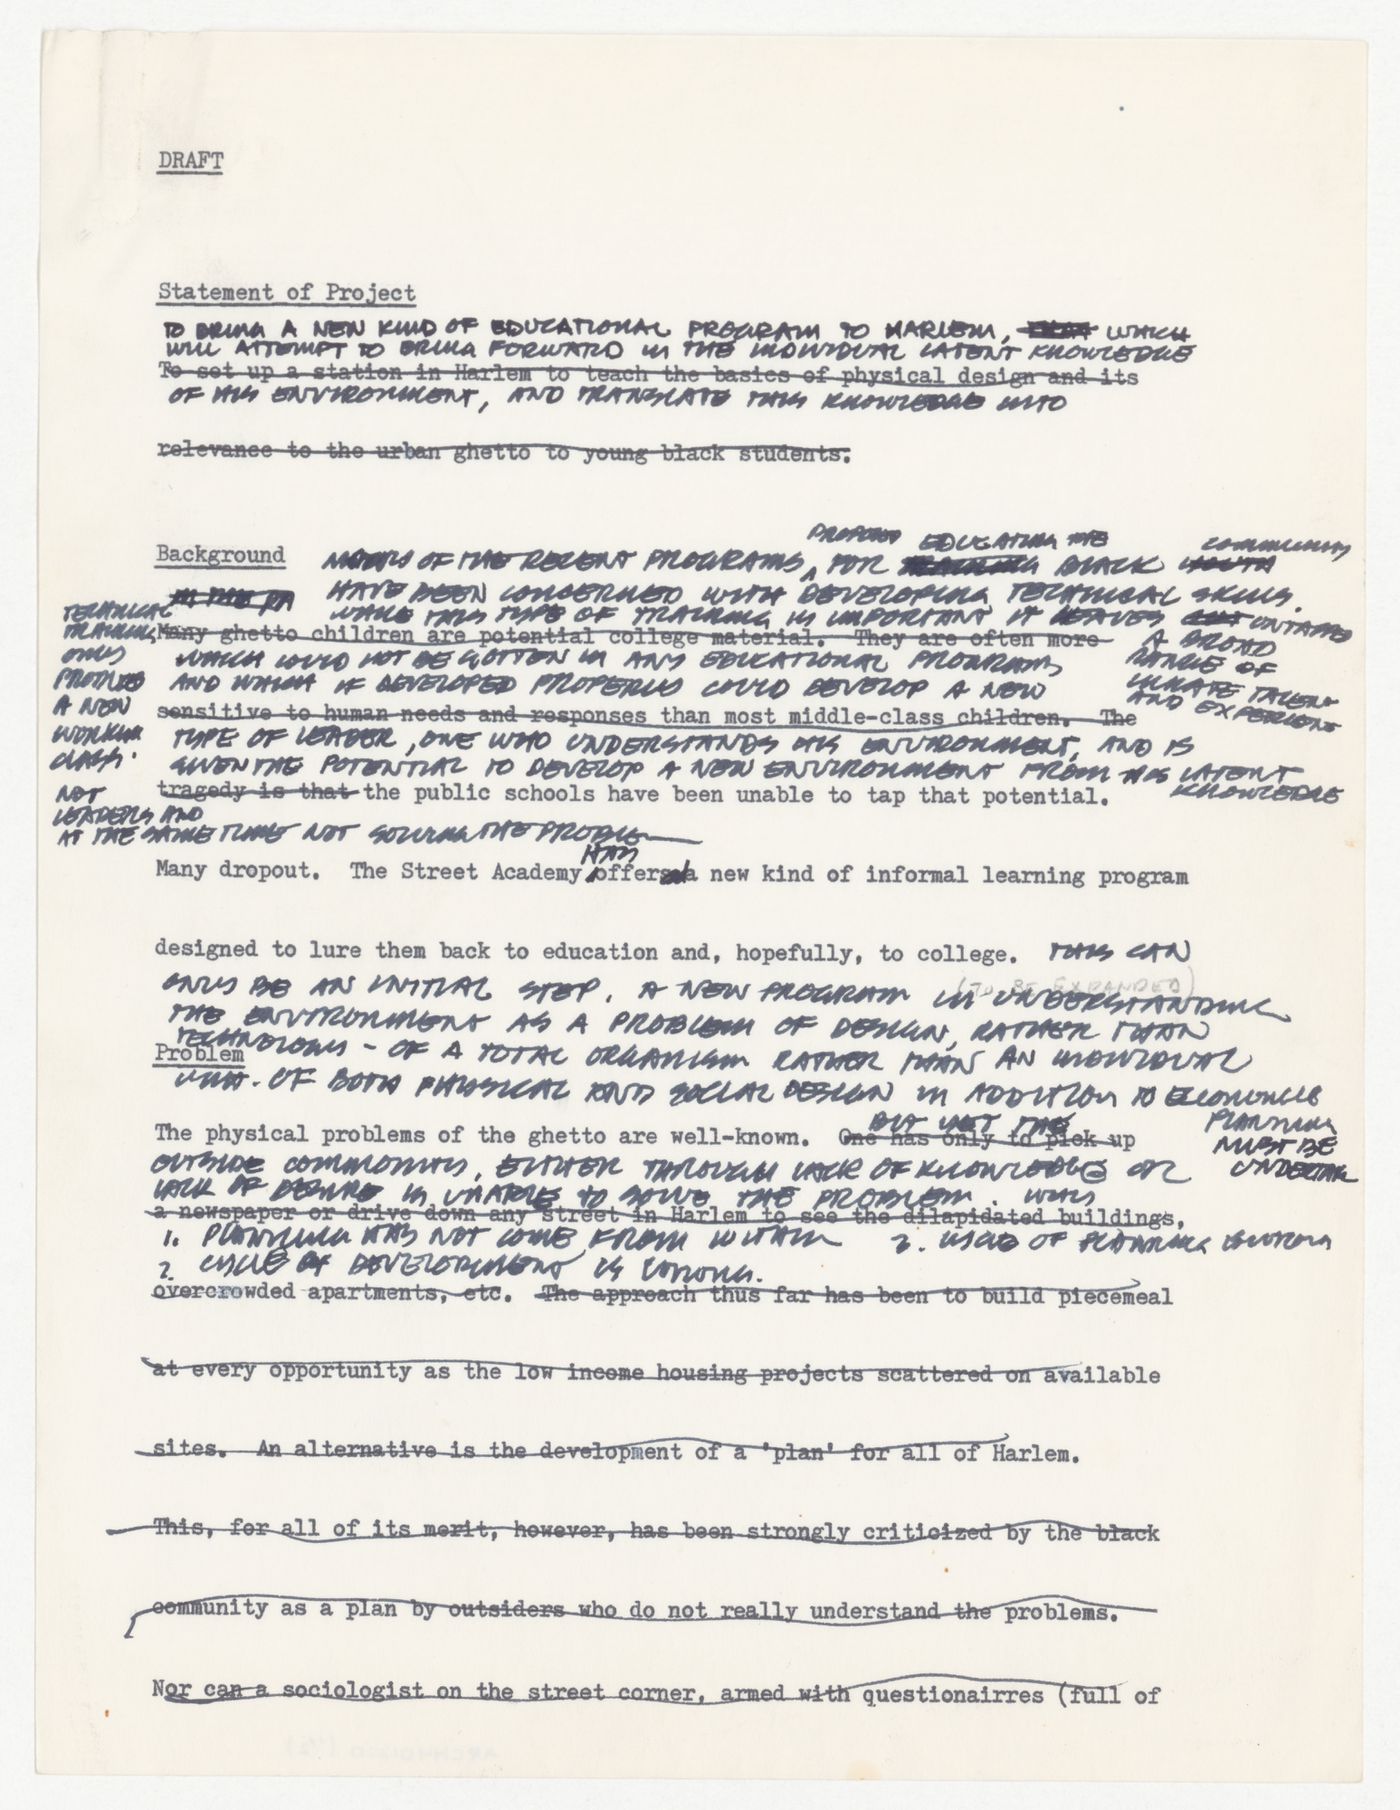 Draft project statement for Harlem educational program with annotations by Peter D. Eisenman